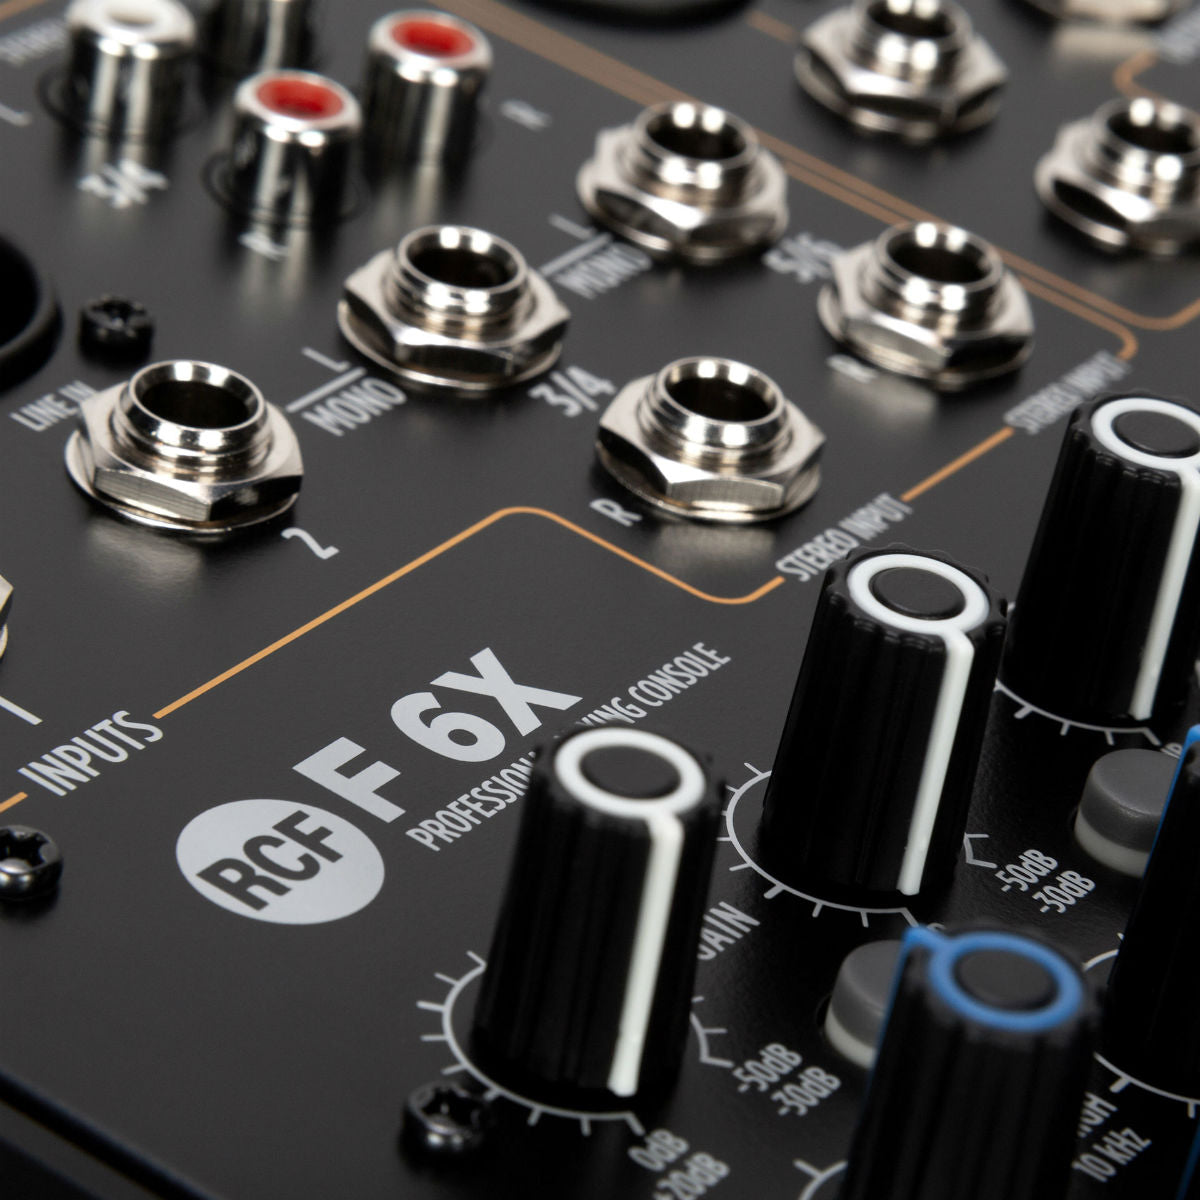 RCF F 6X 6-Channel Mixer With Multi-FX